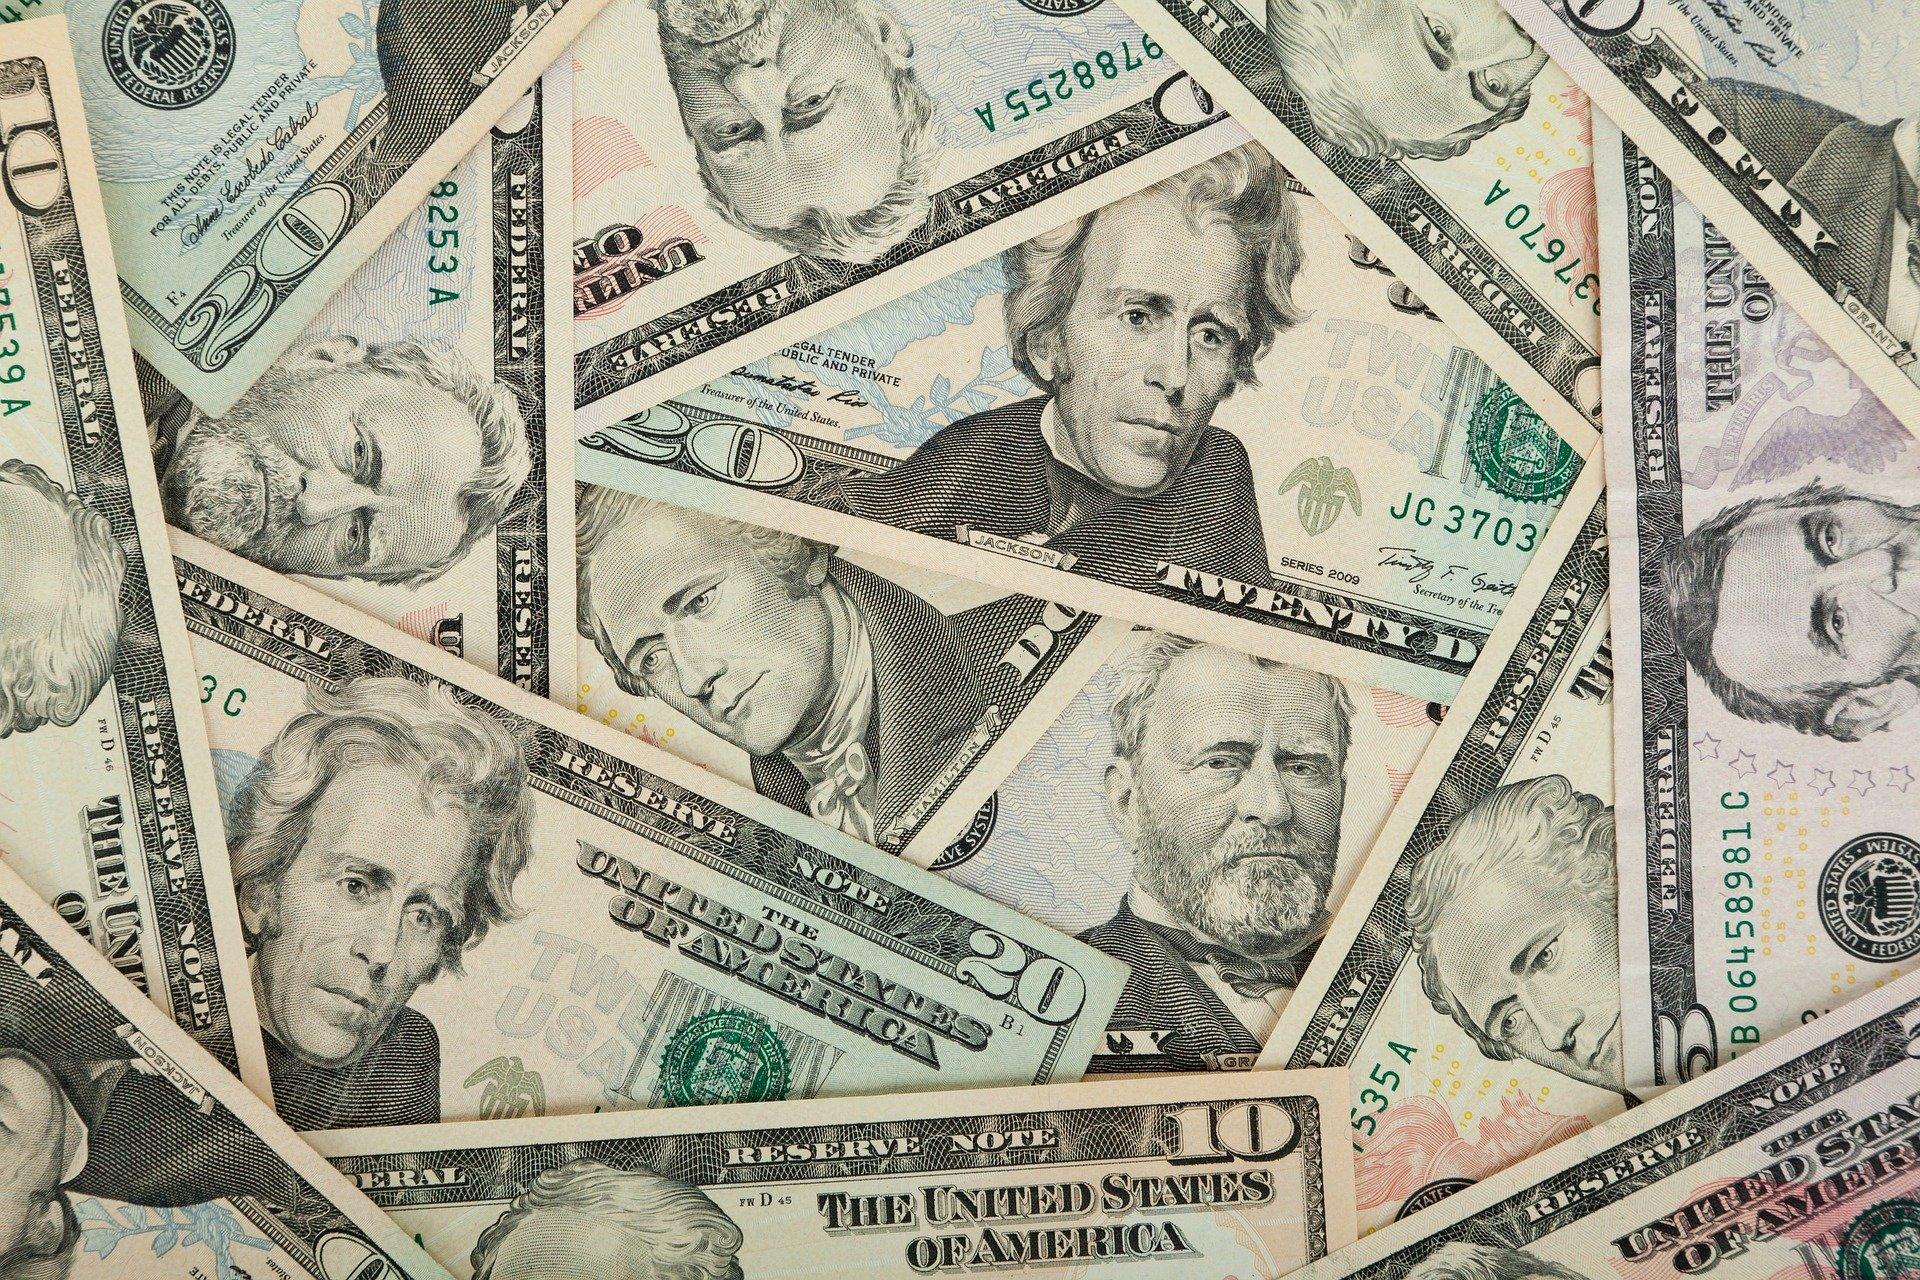 Assorted U.S. currency. Image by Public Domain Pictures from Pixabay